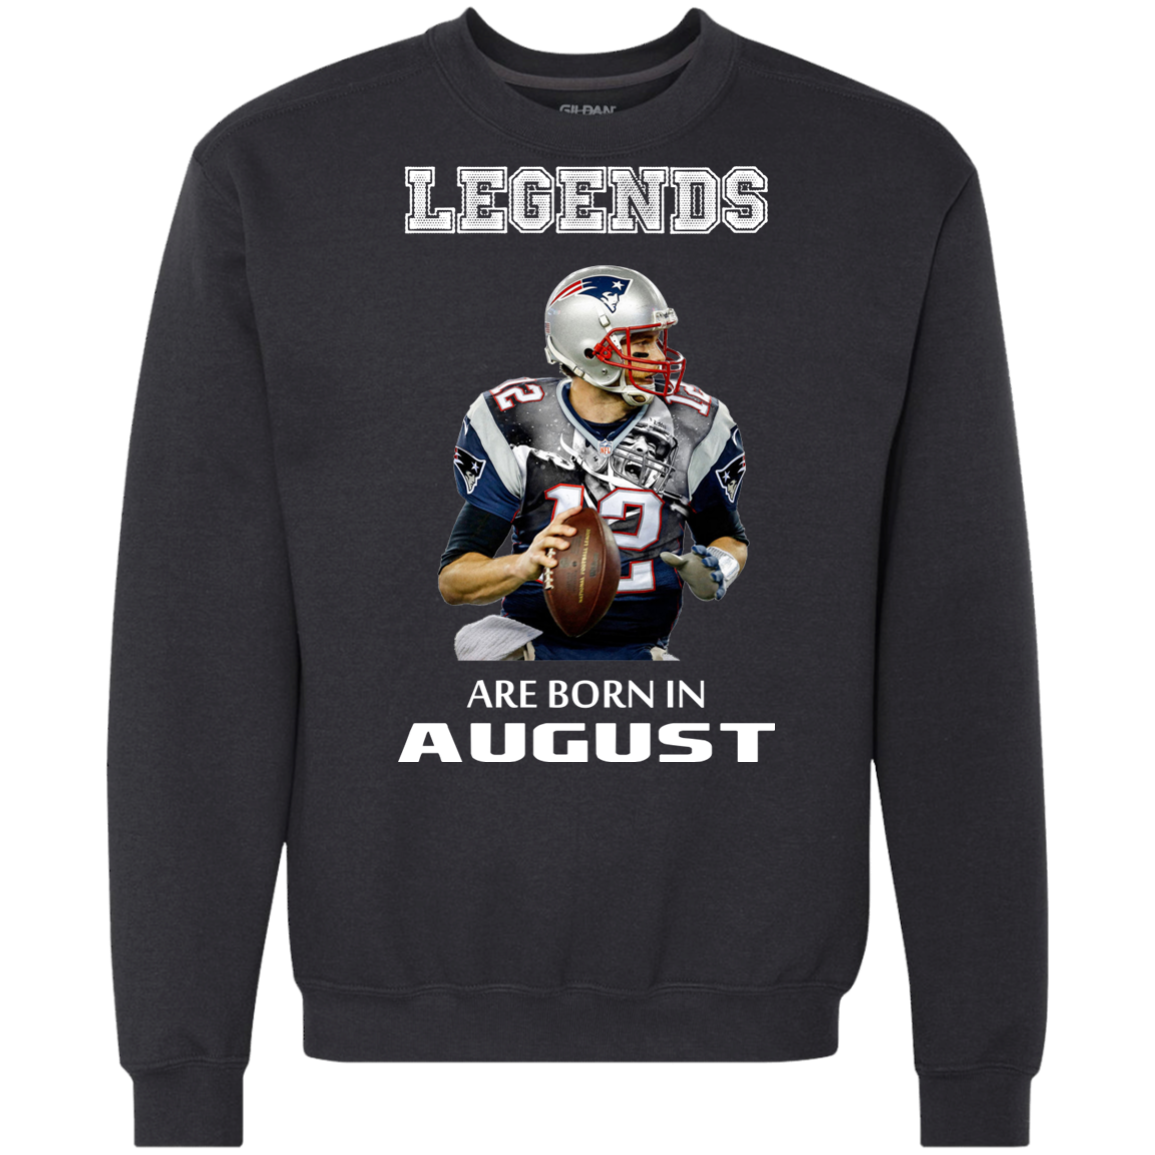 Legends Are Born In August (Tom Brady) T-Shirt - Buy T-Shirts ...